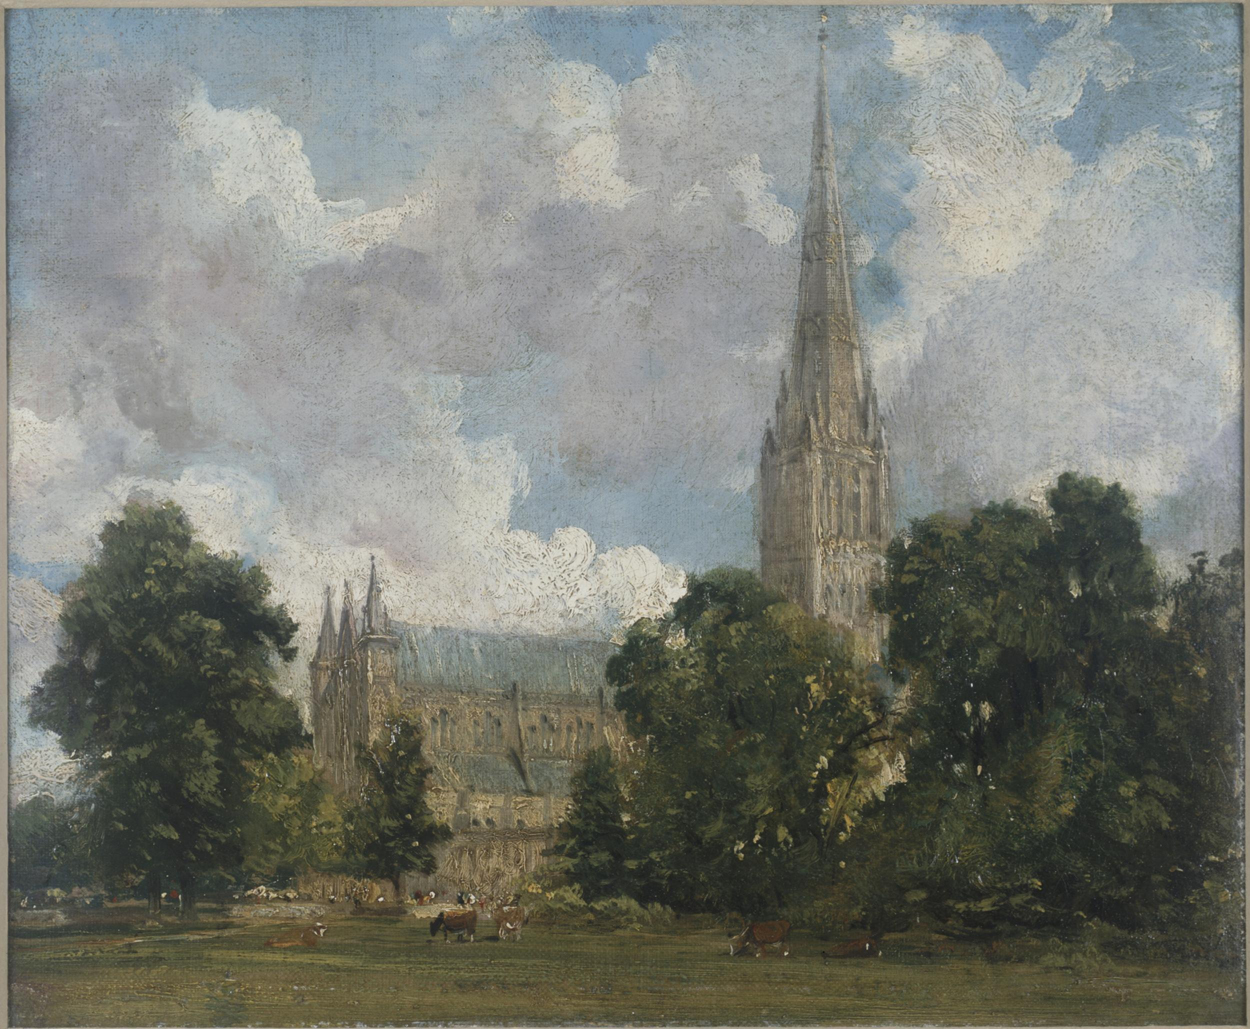 Salisbury Cathedral from the south-west by John Constable - c. 1820 - 25 x 30 cm Victoria and Albert Museum